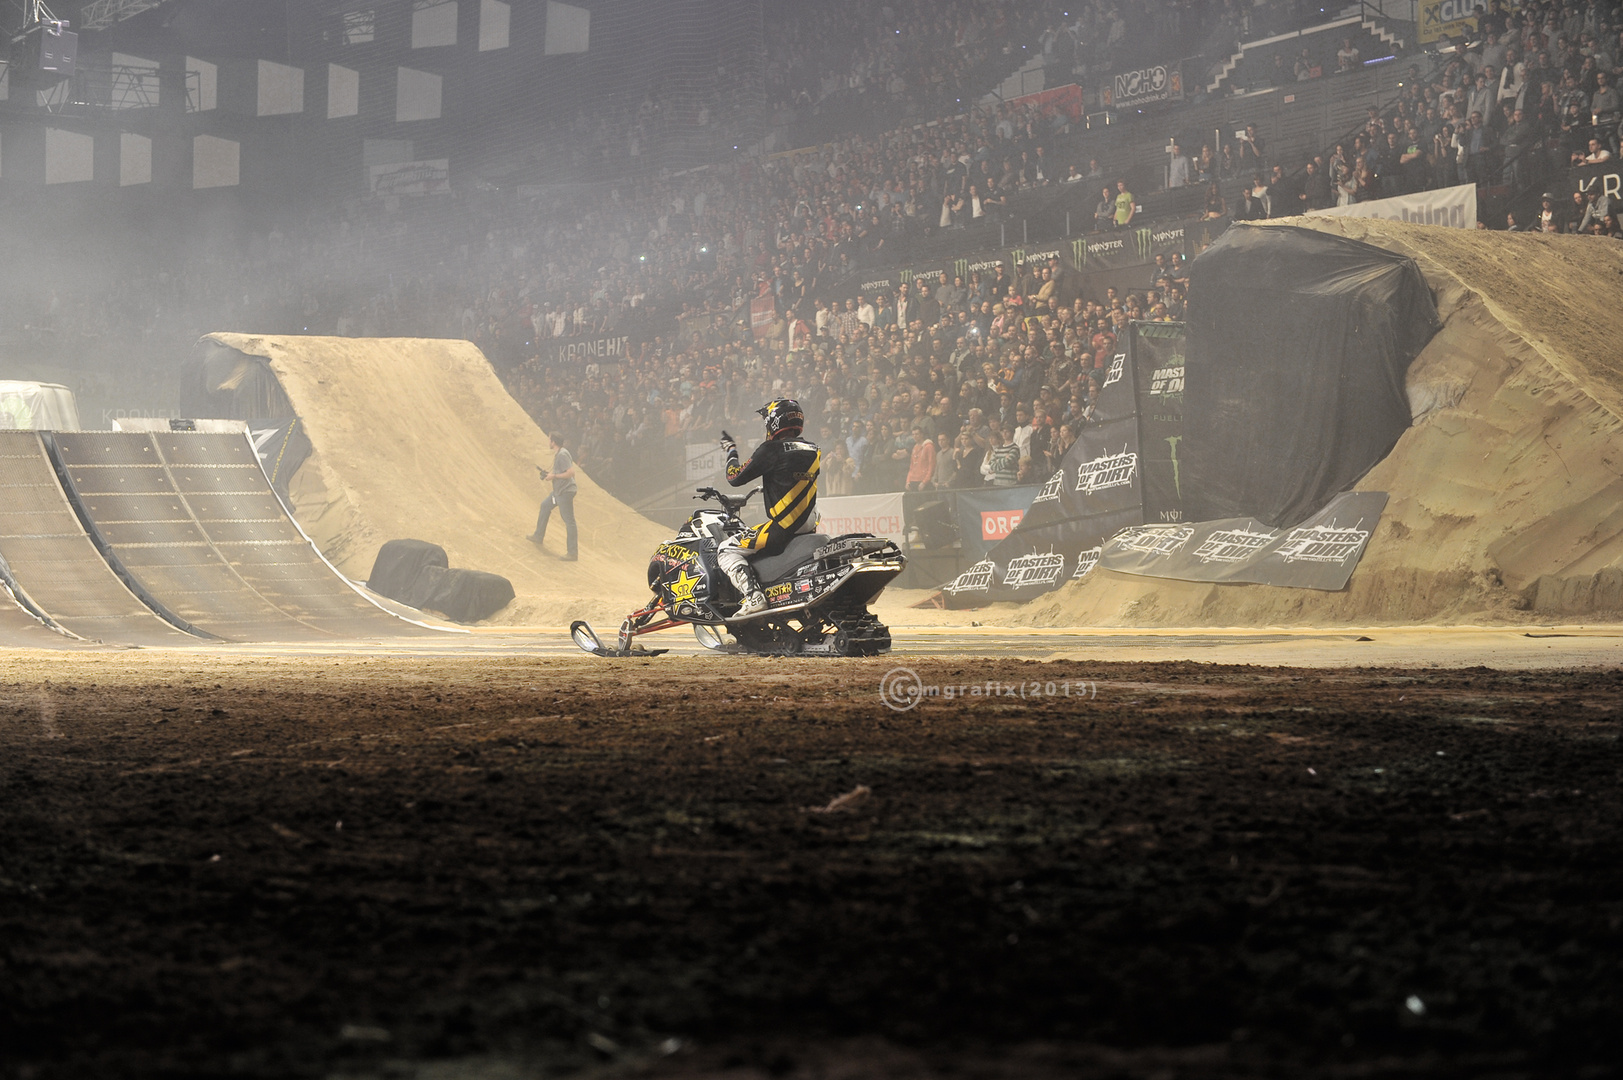 FMX-Snowmobile at masters of dirt 2013